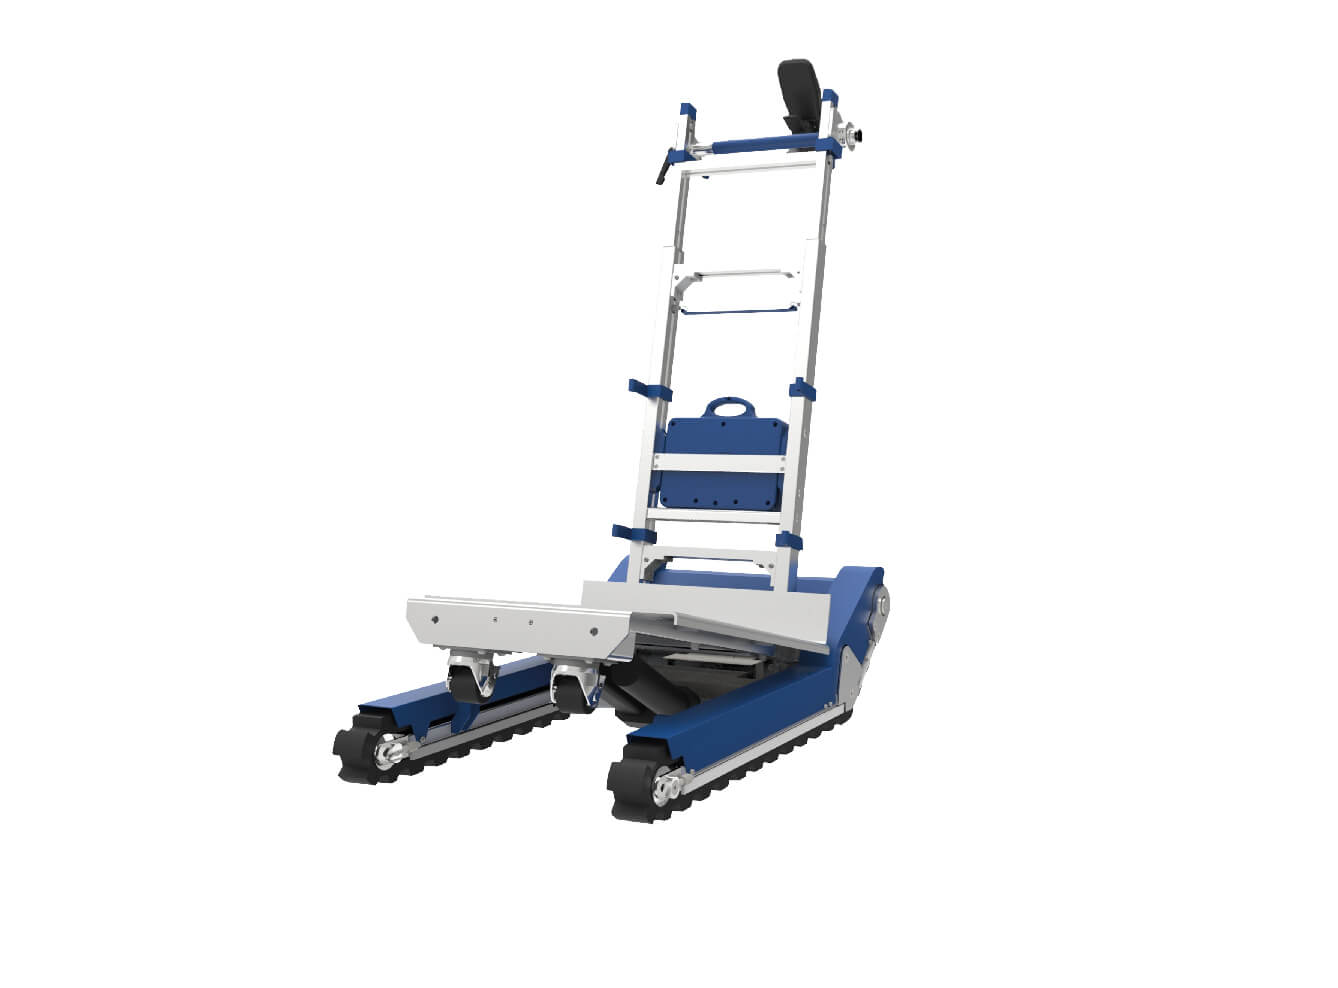 Electric stair climber hand trucks with rubber tracks